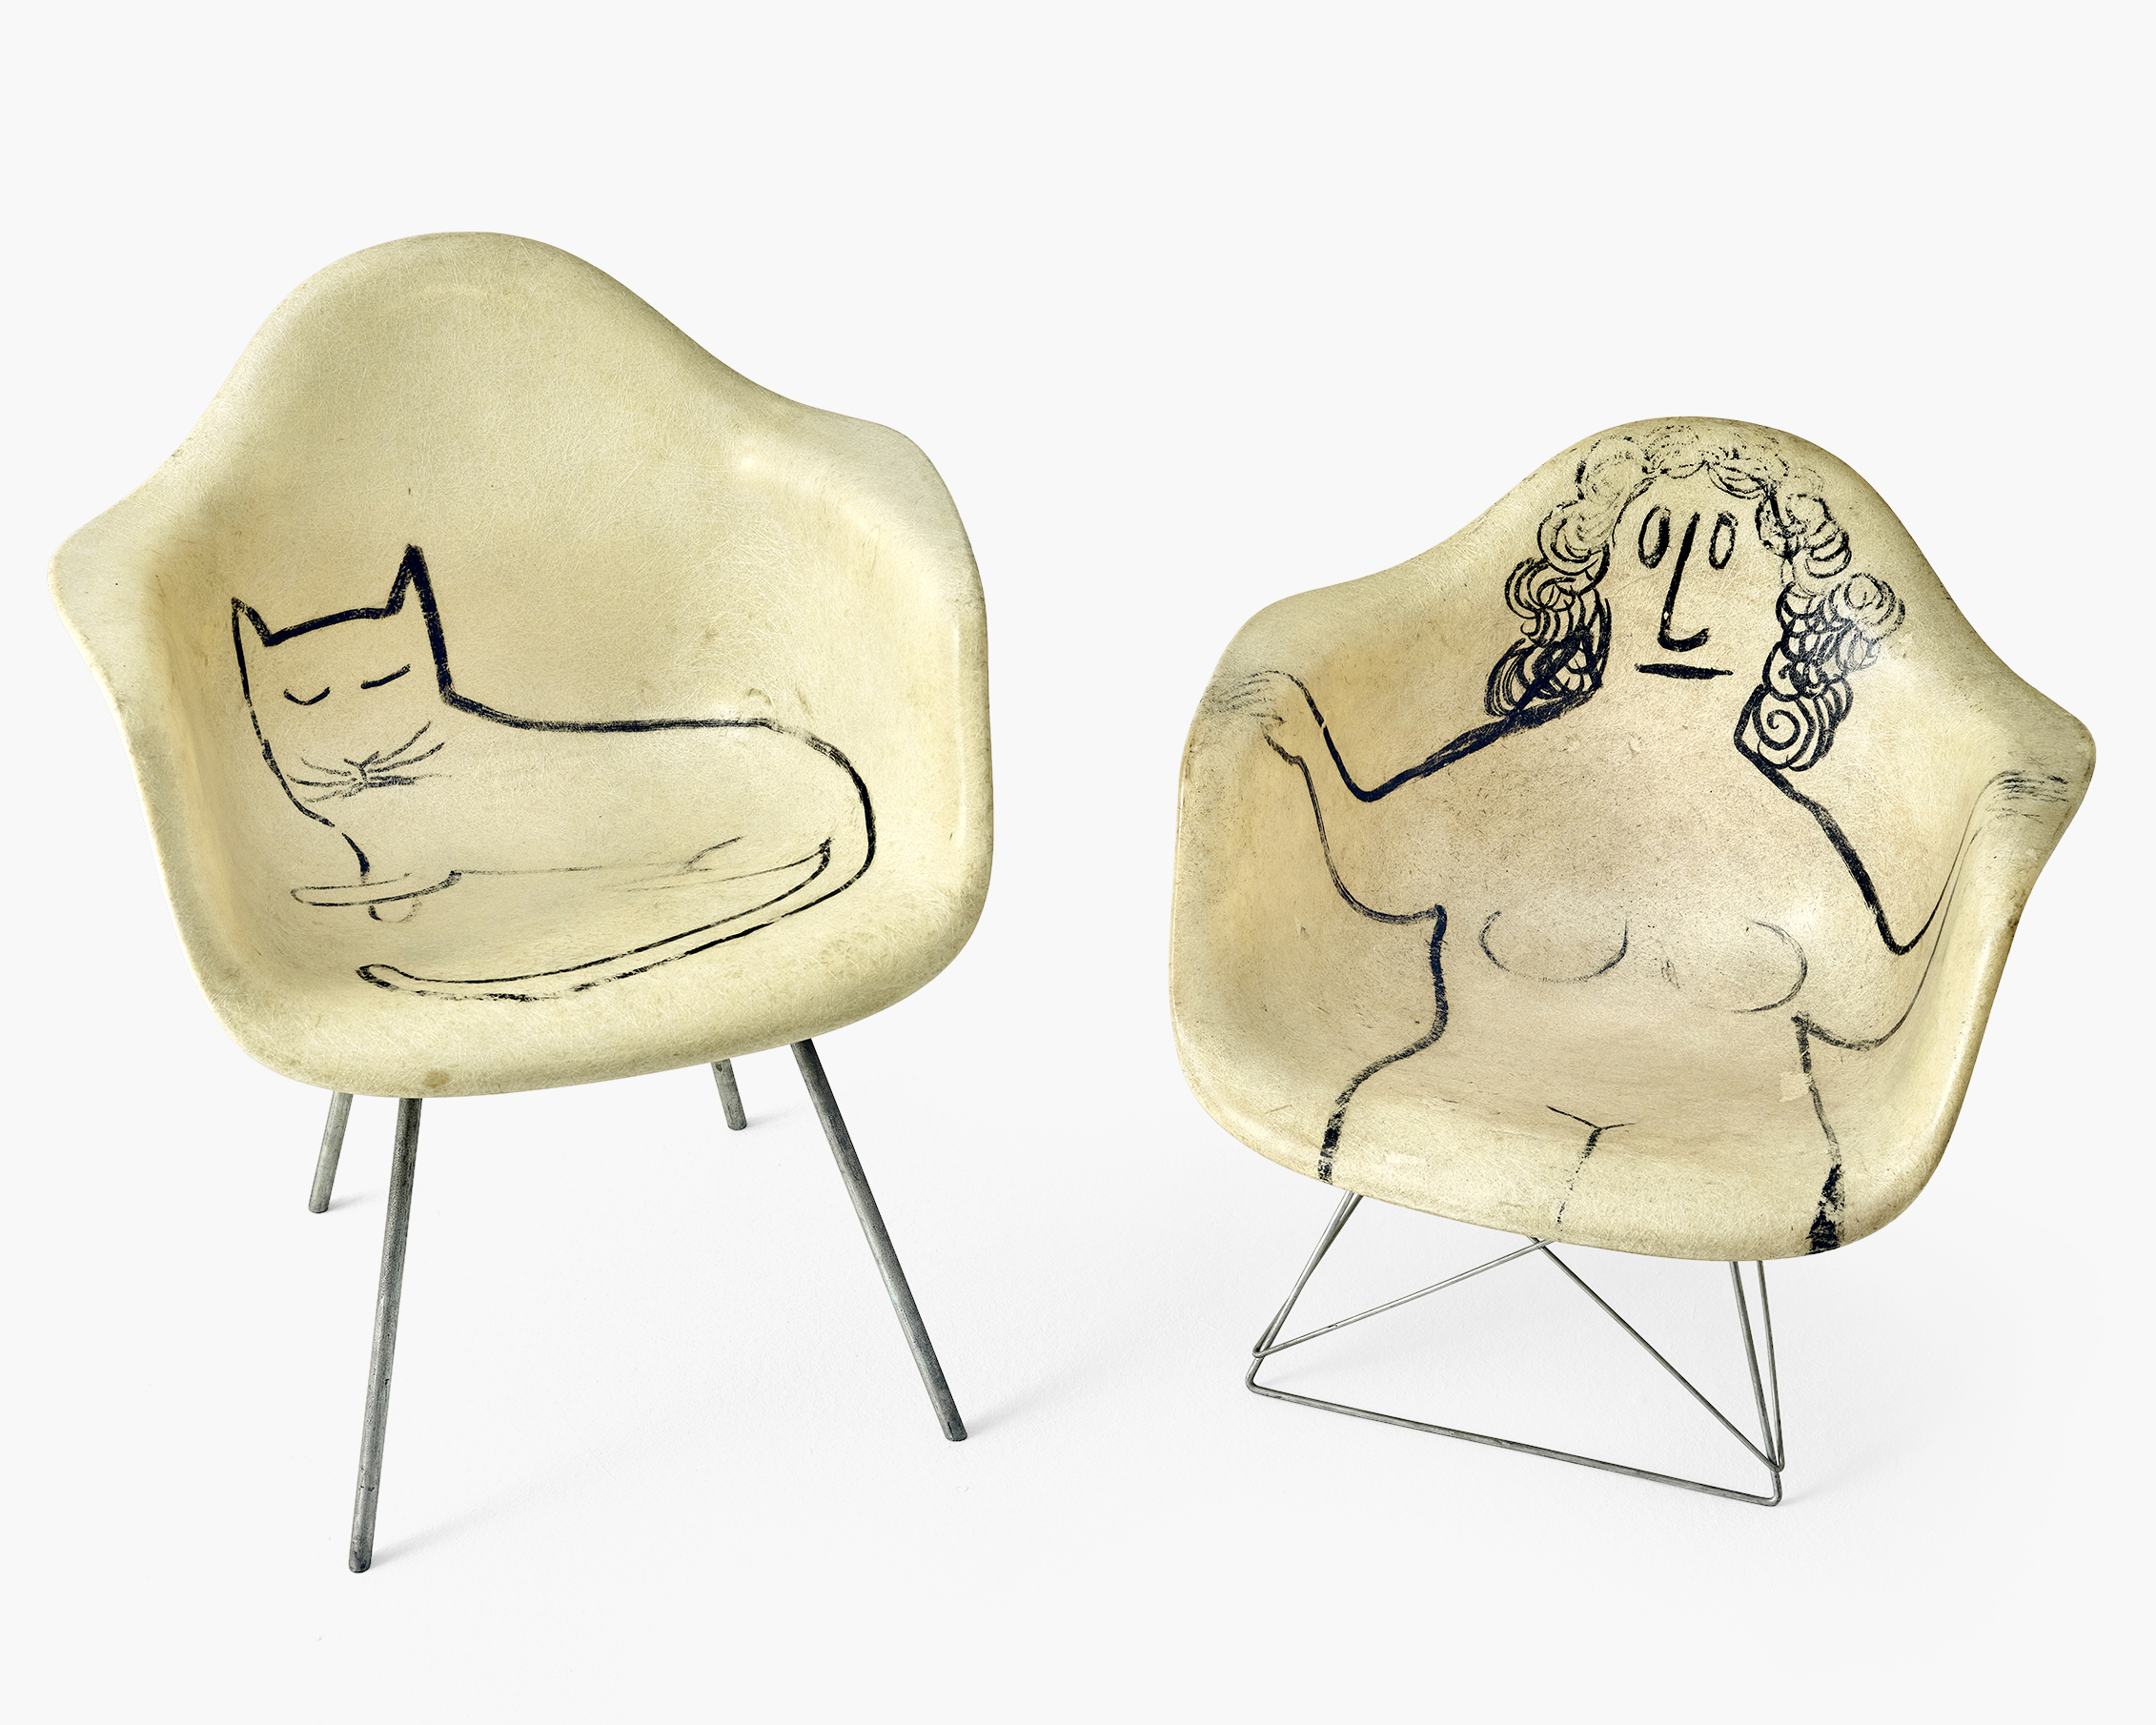 Eames armchairs with Steinberg illustrations